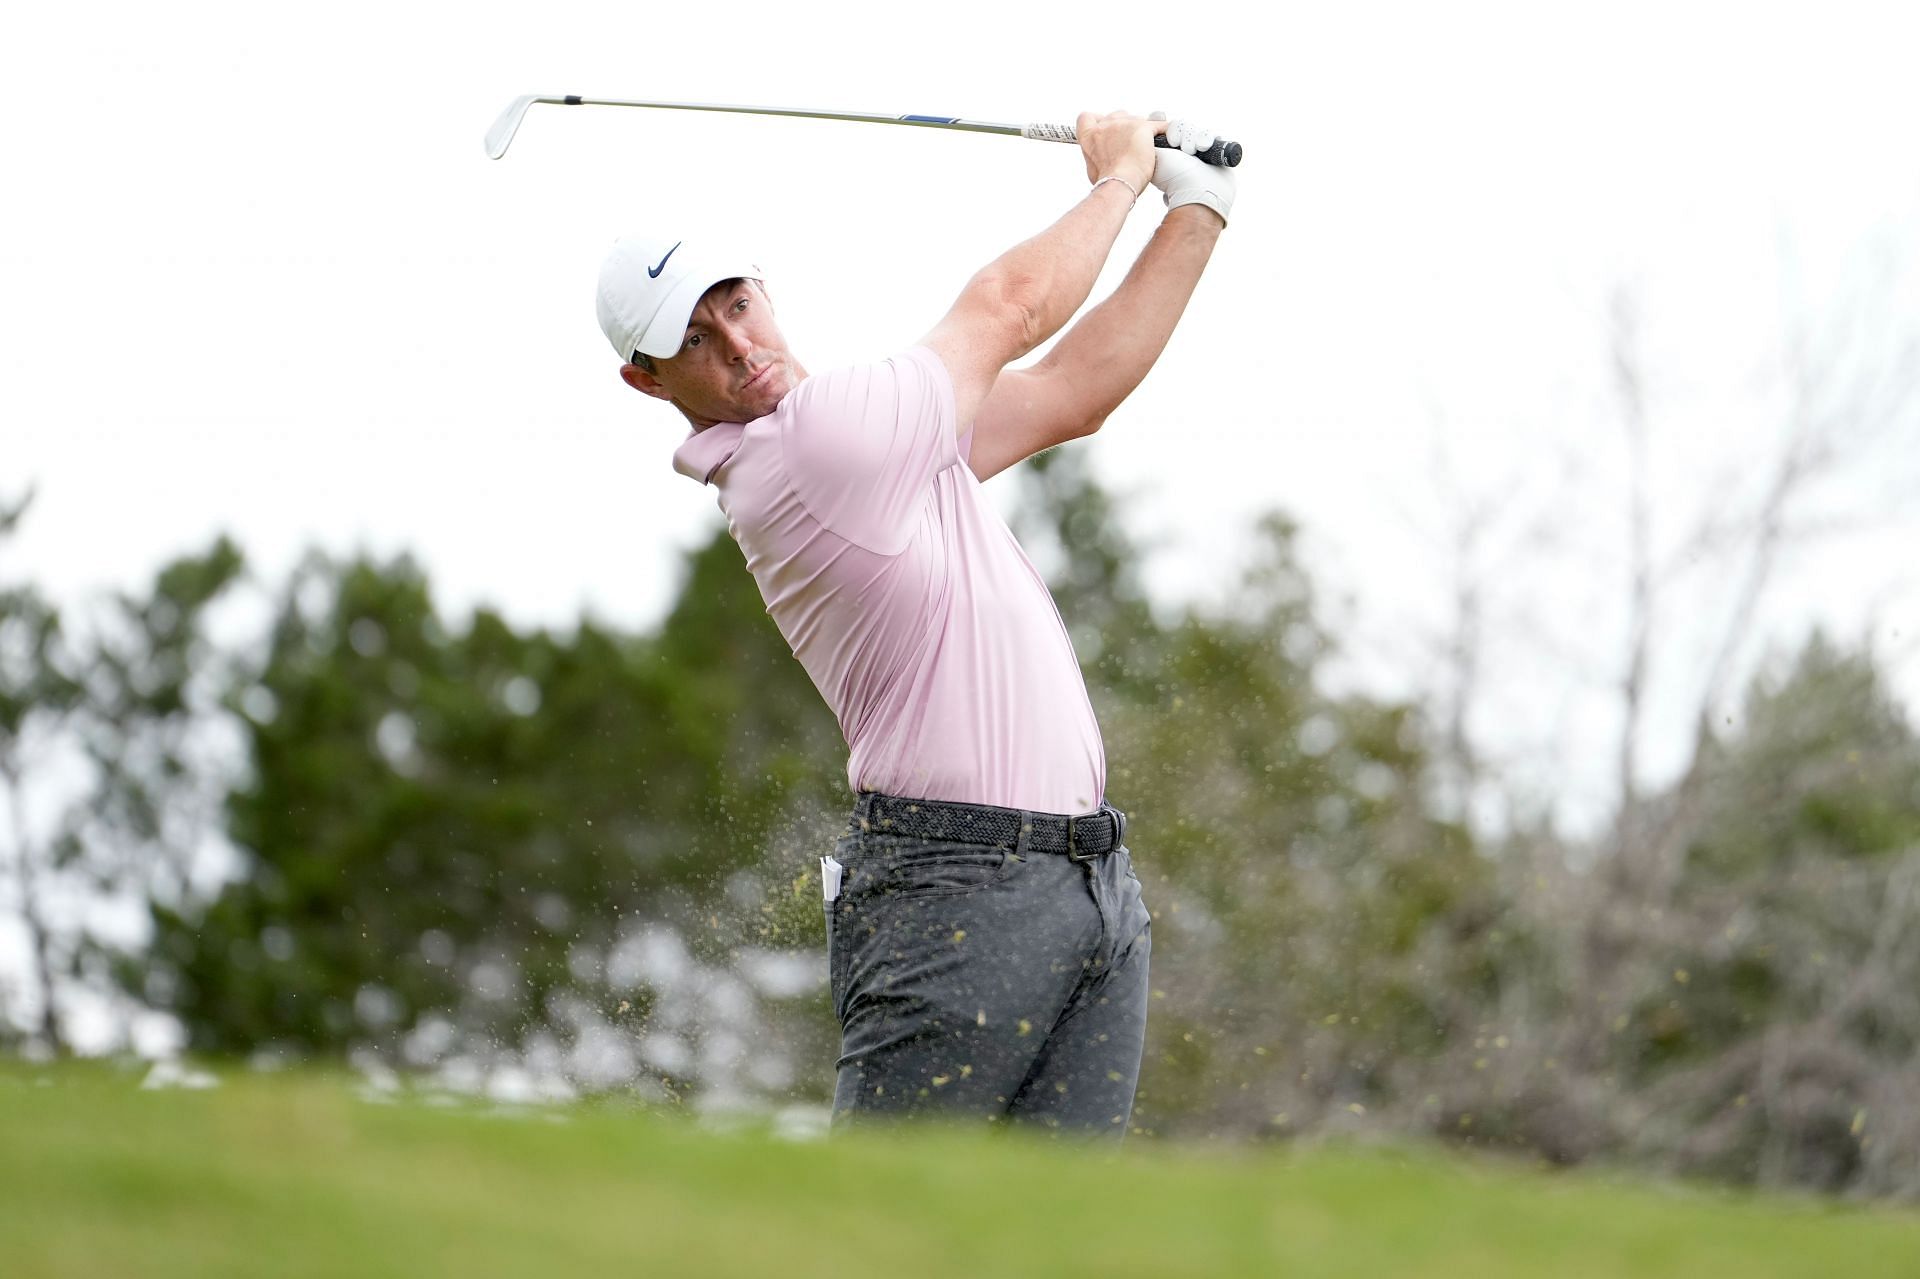 Rory McIlroy is aiming for a Masters win this weekend